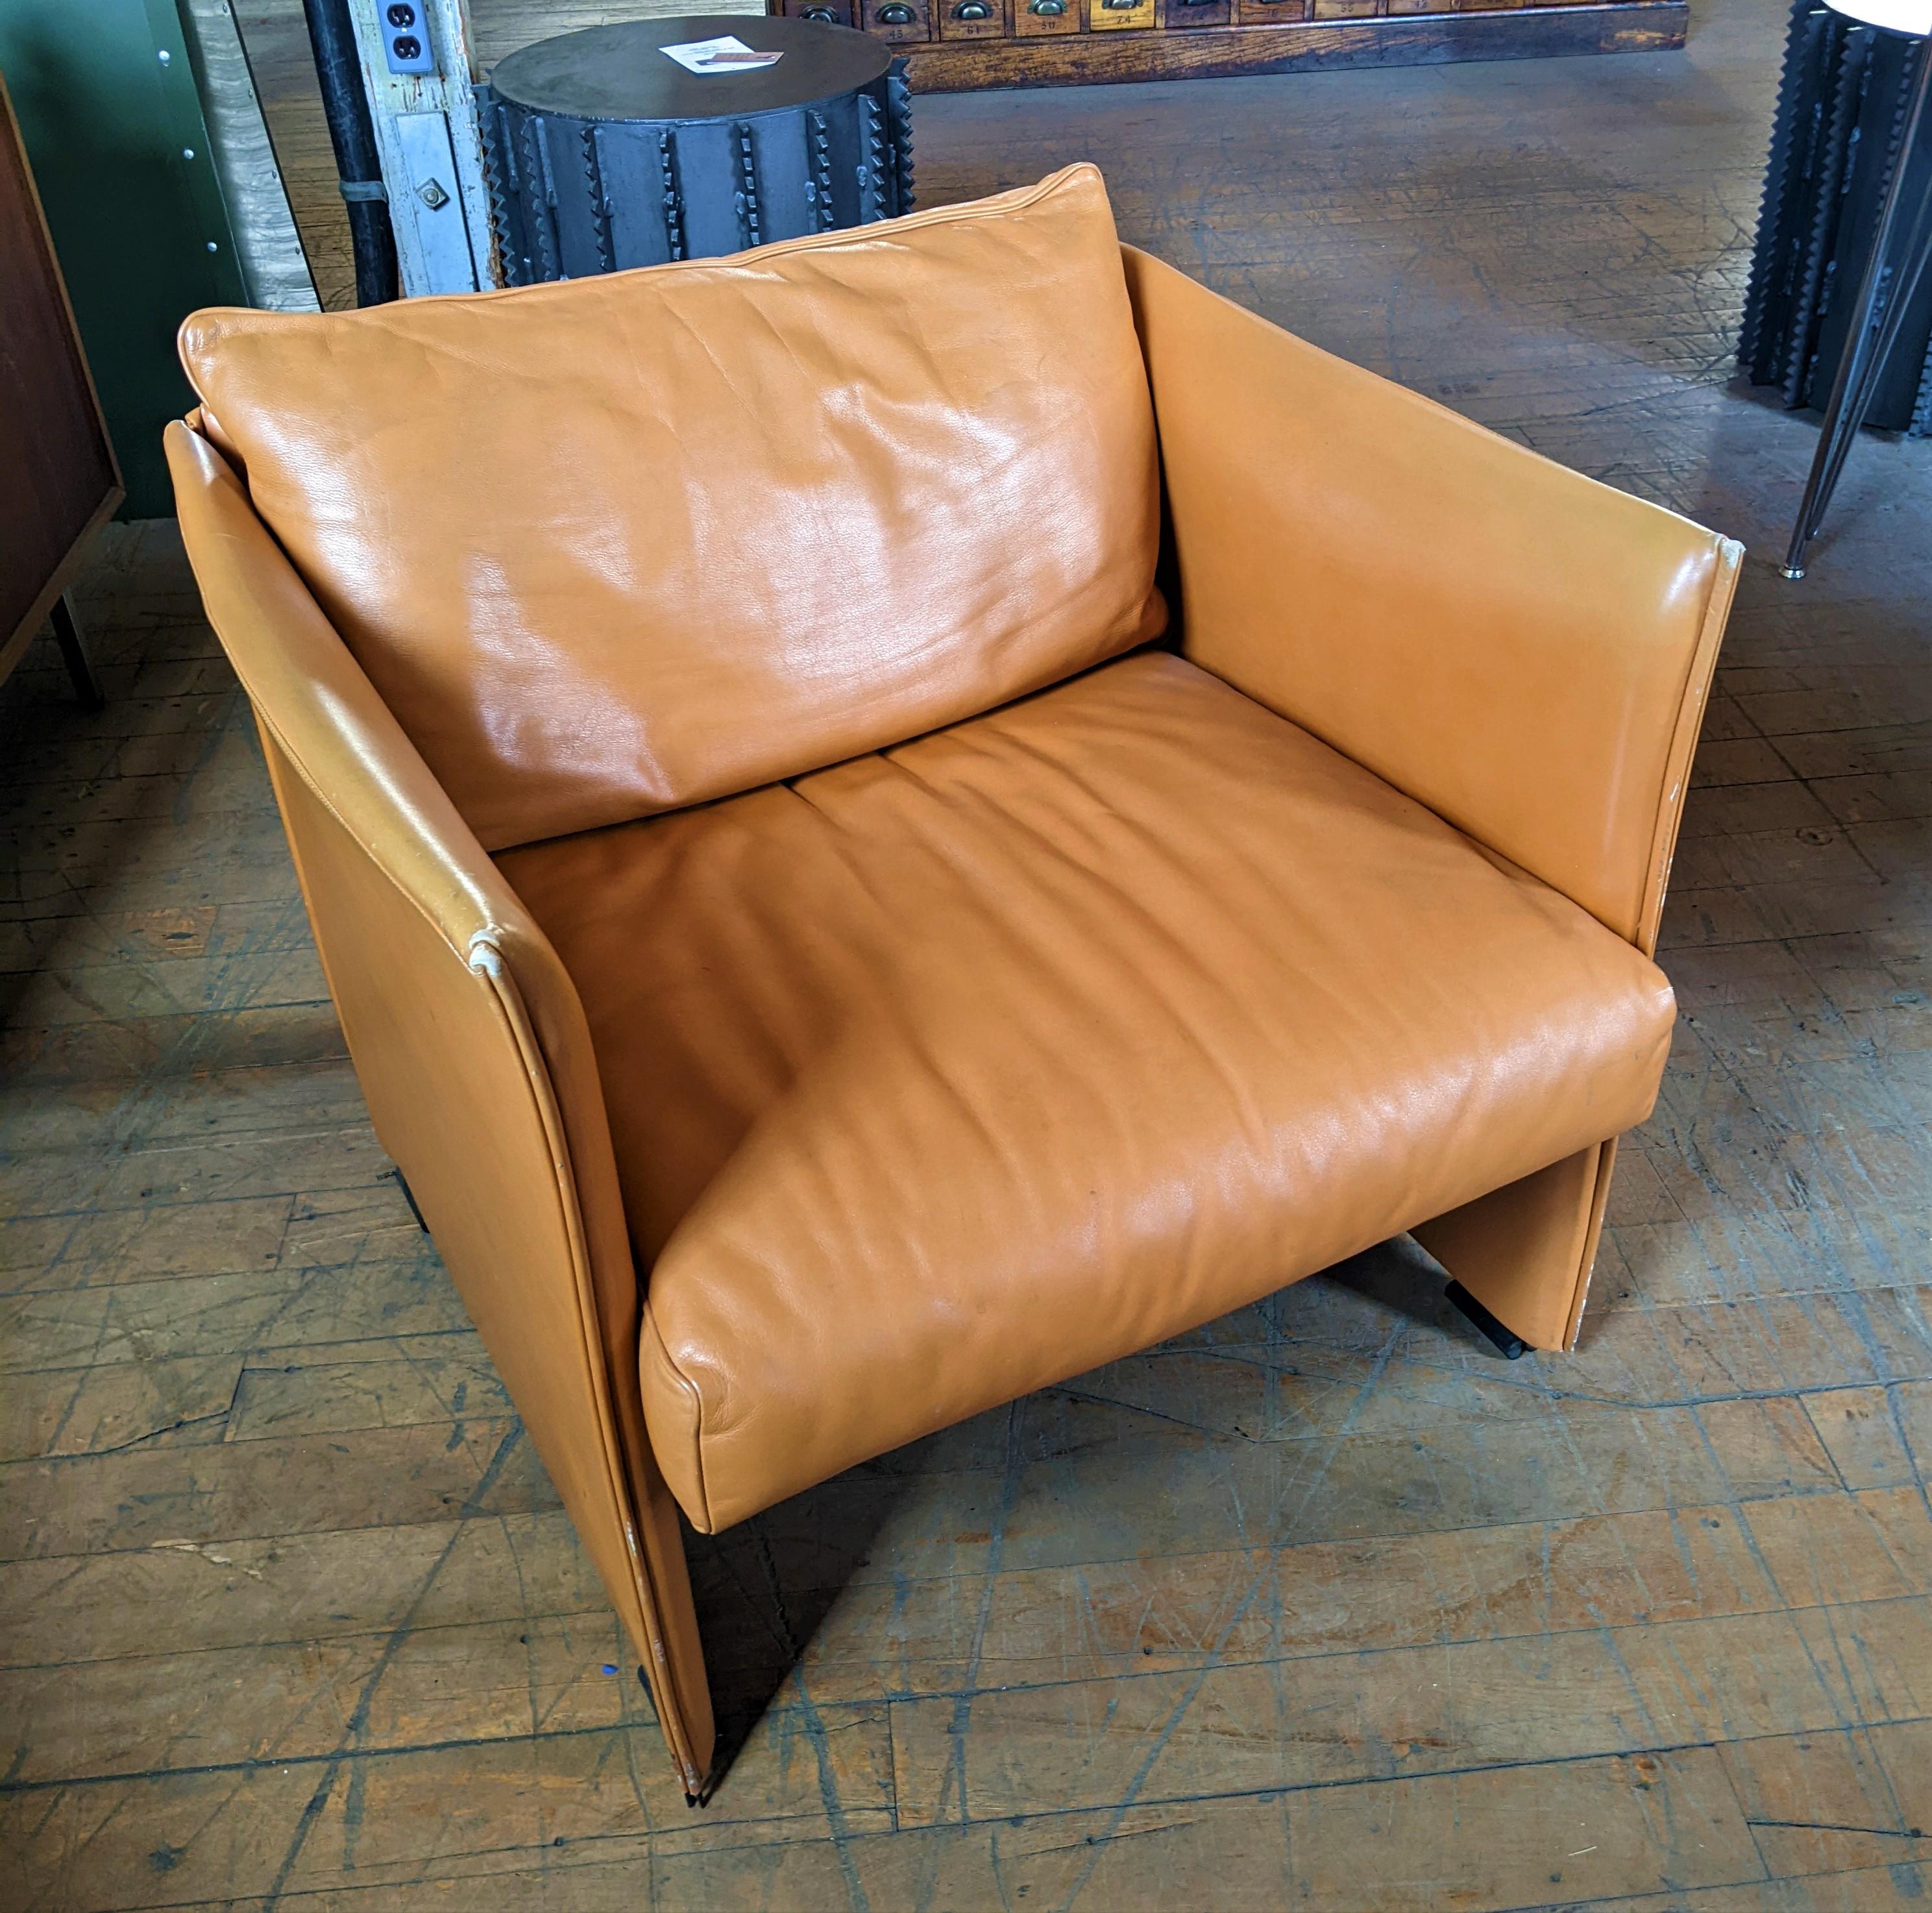 Authentic Vintage Mid-Century Modern Armchair by Mario Bellini

Overall Dimensions: 31